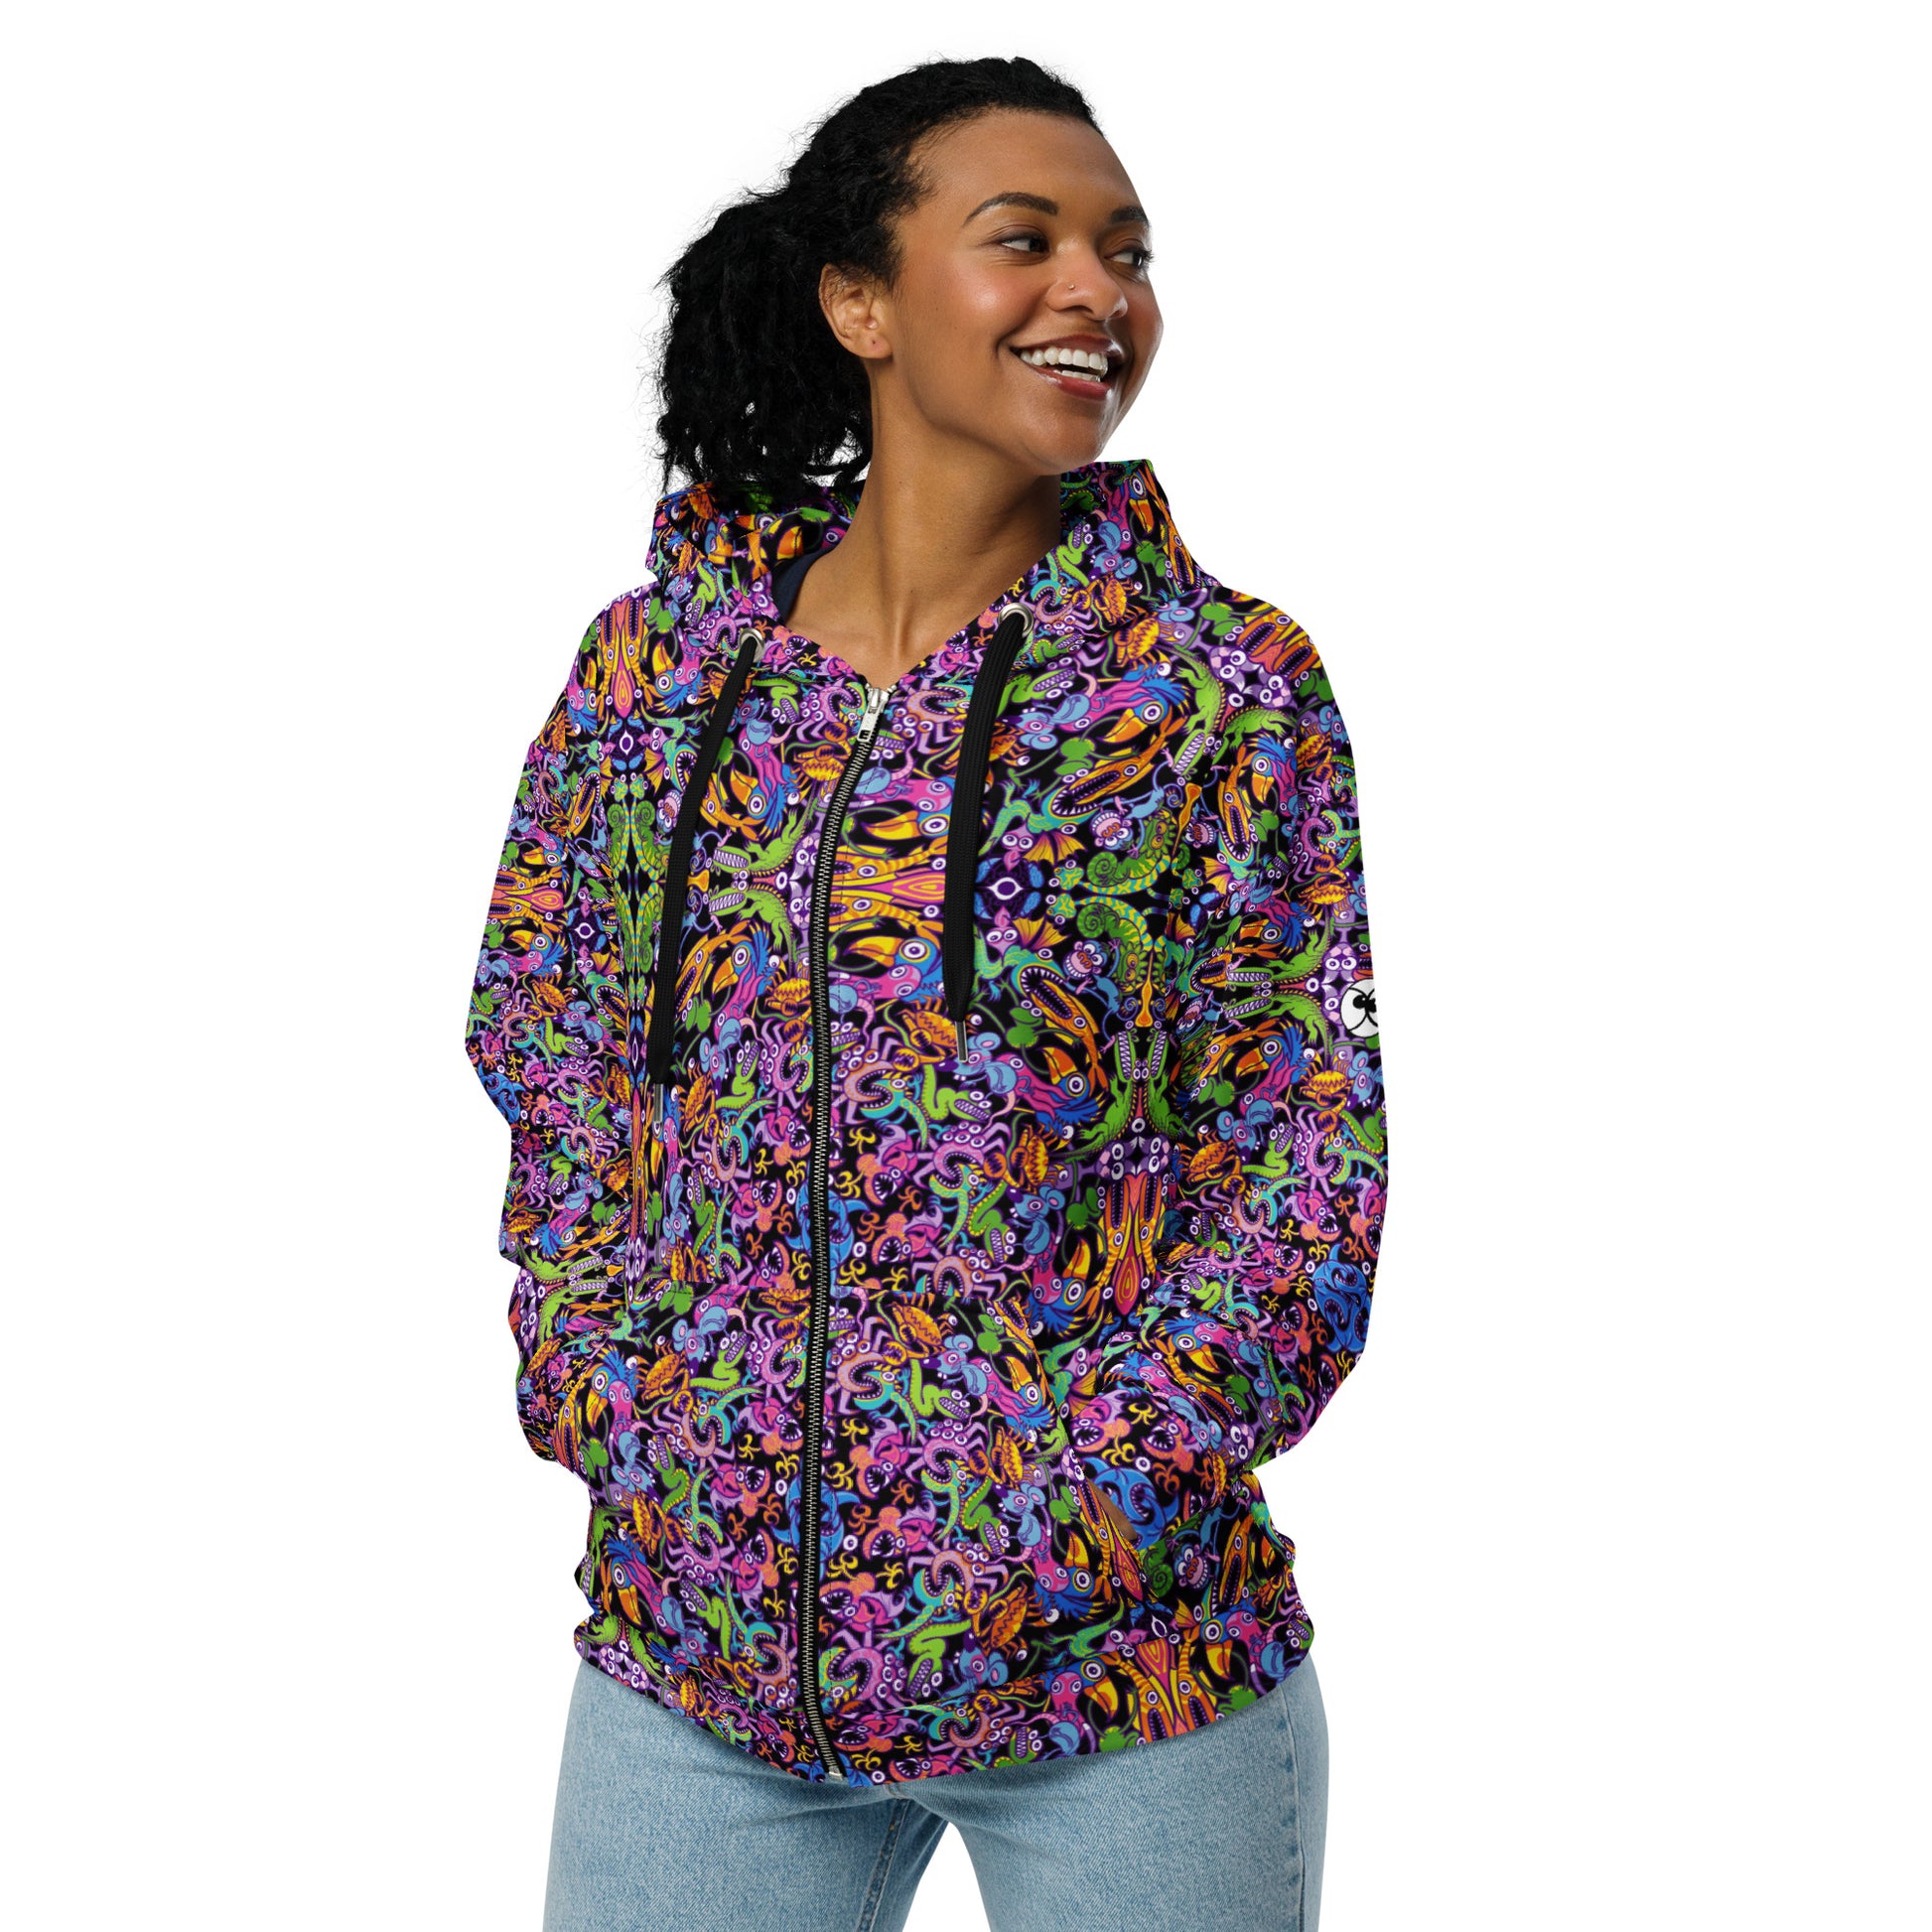 Eccentric critters in a lively festival - Unisex zip hoodie. Lifestyle